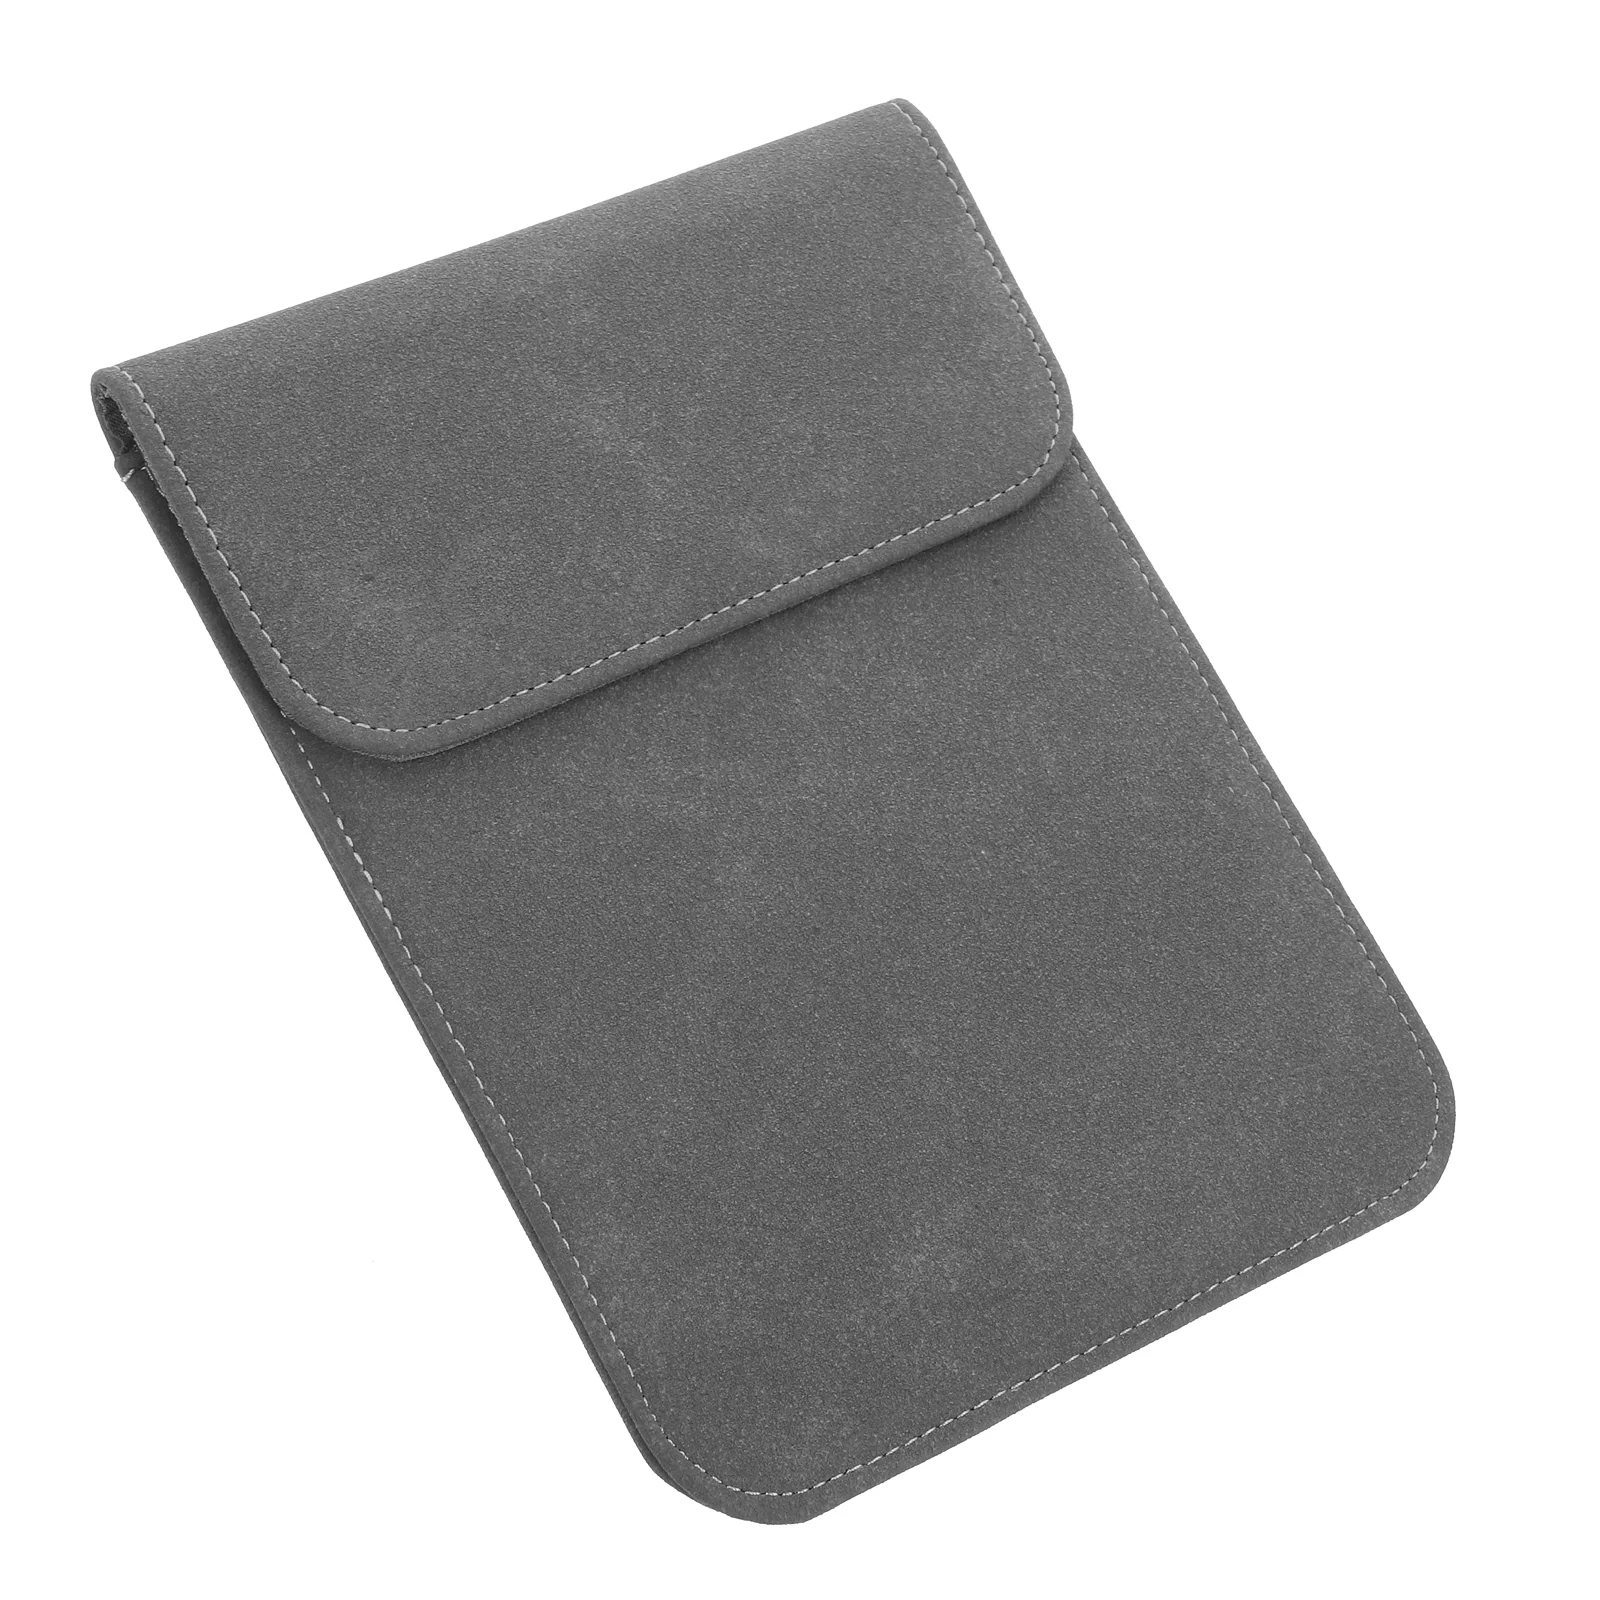 

Ebook Reader -book Travel Bag Inner Protective Imitation Carrying E-reader Sleeve Thenotebook